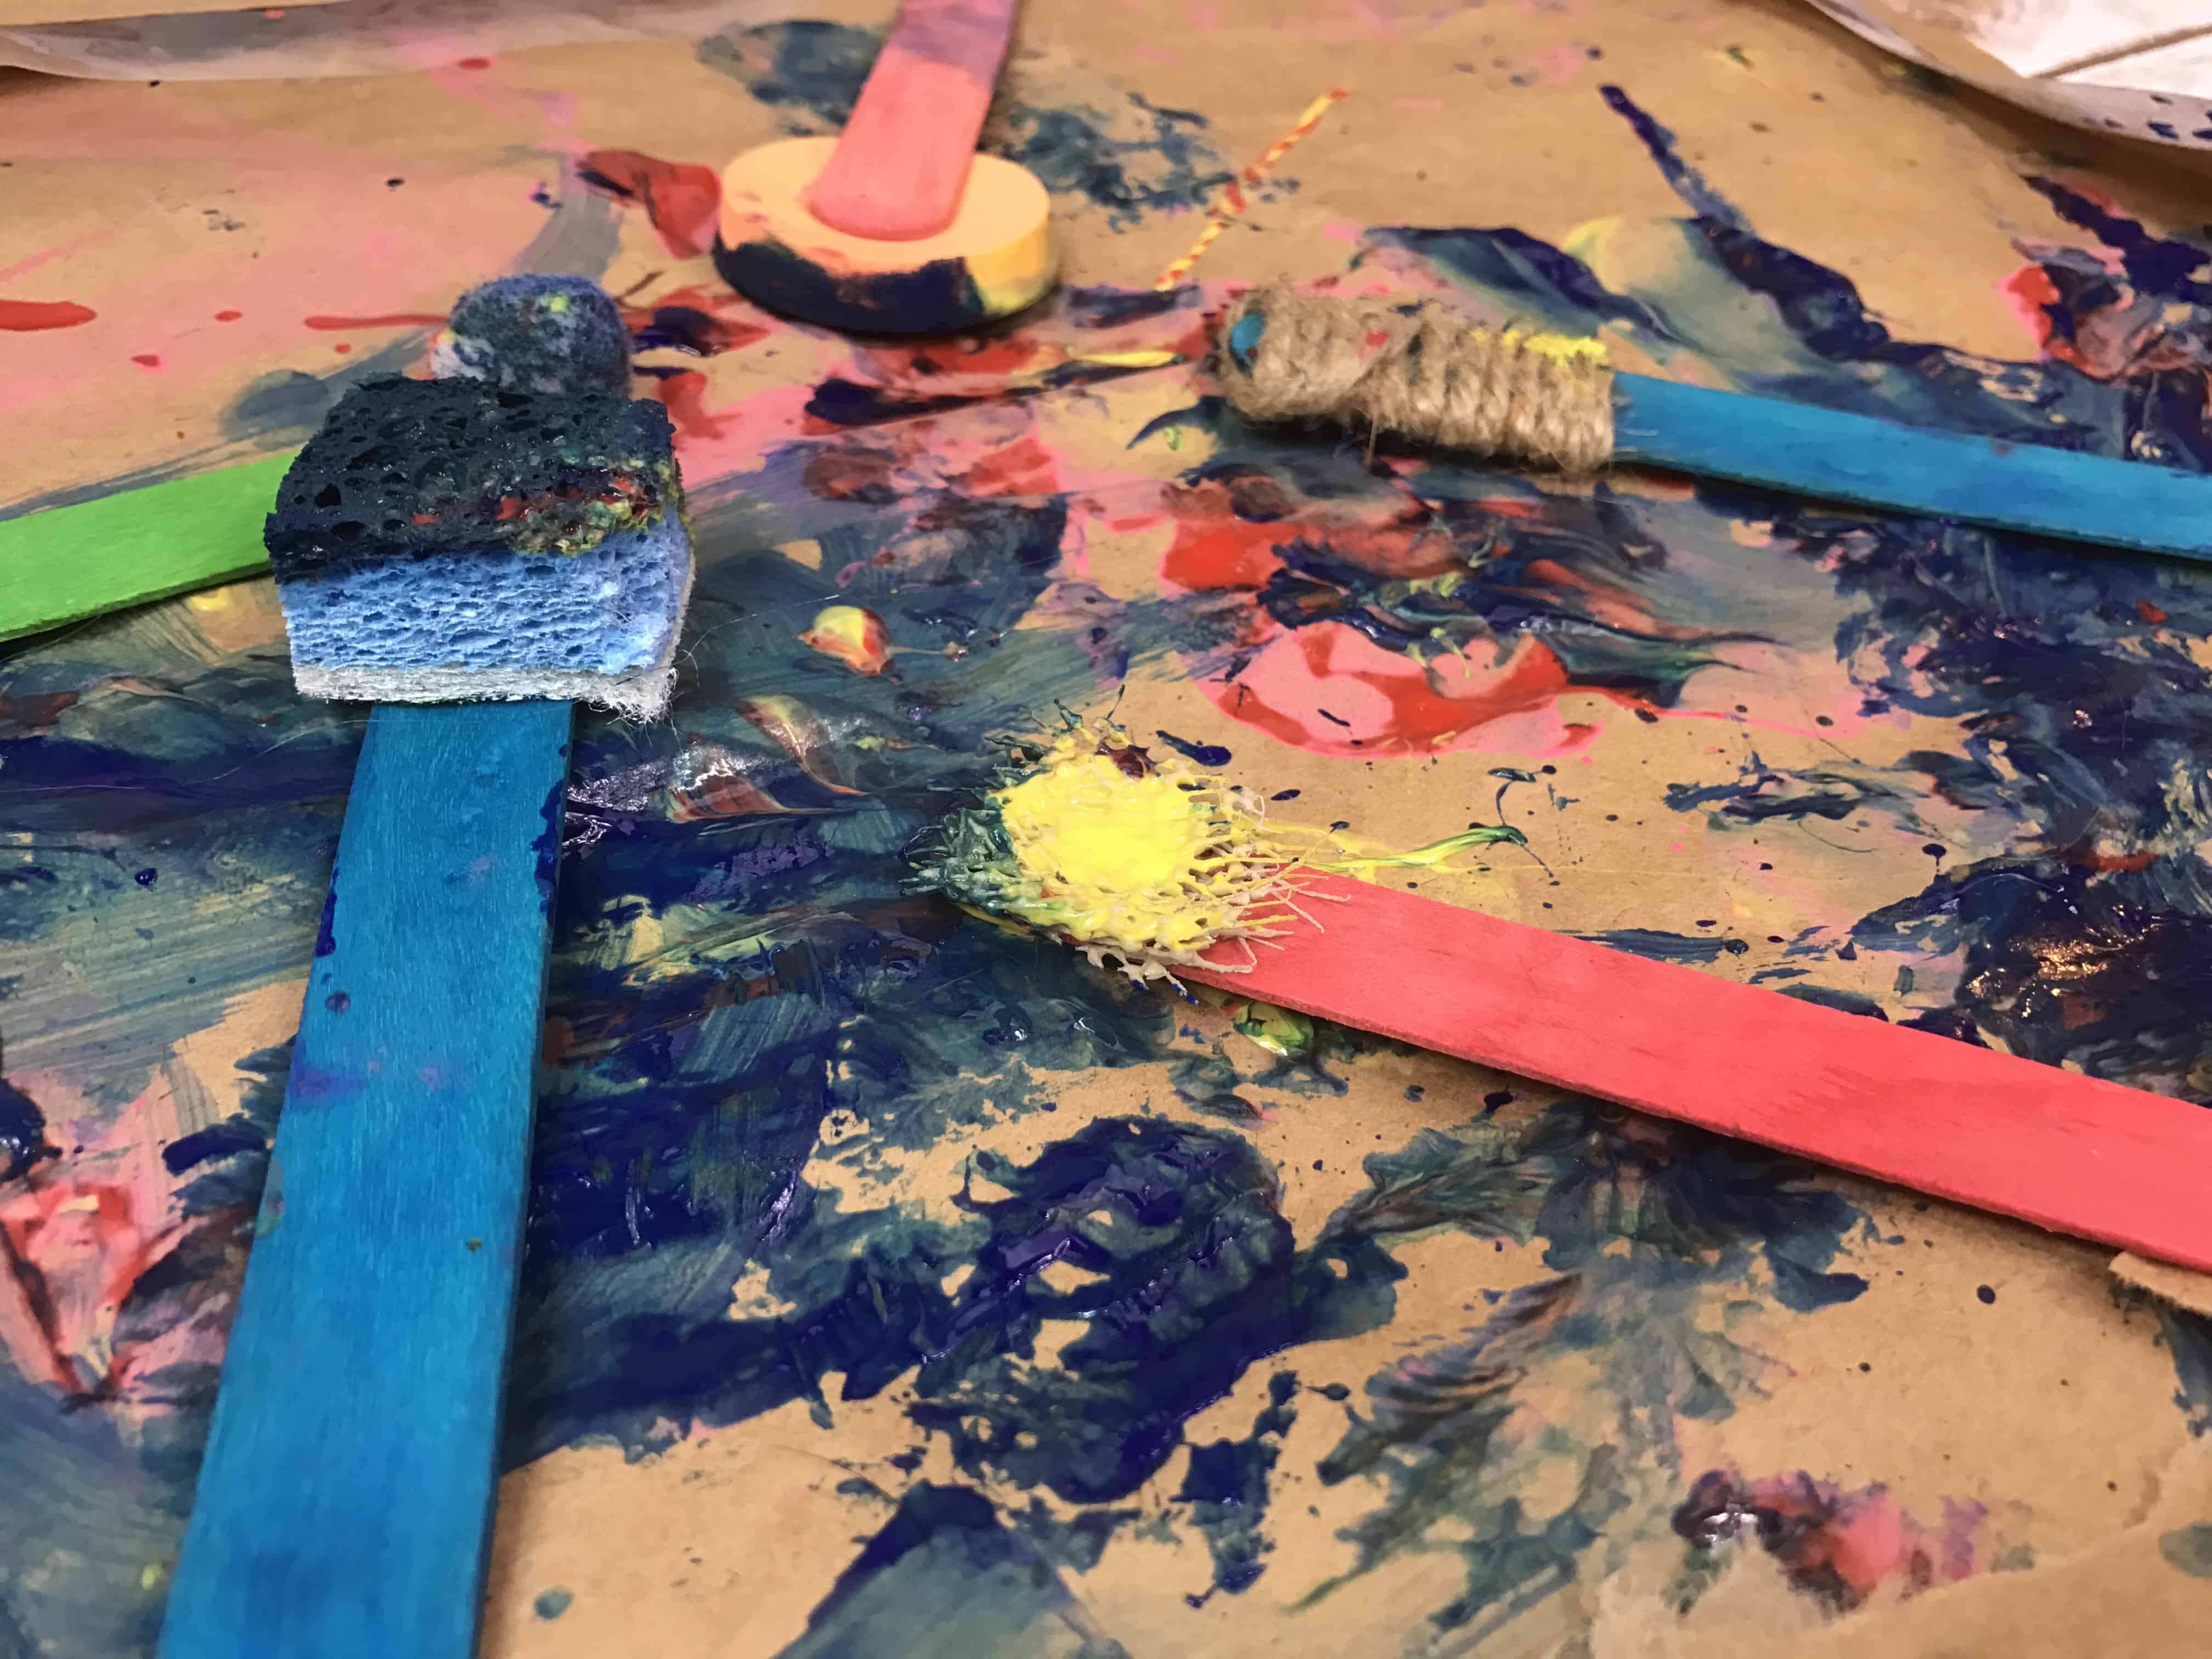  Through this hands-on painting for kids project, children can experience cause and effect while learning about color mixing and textures! 